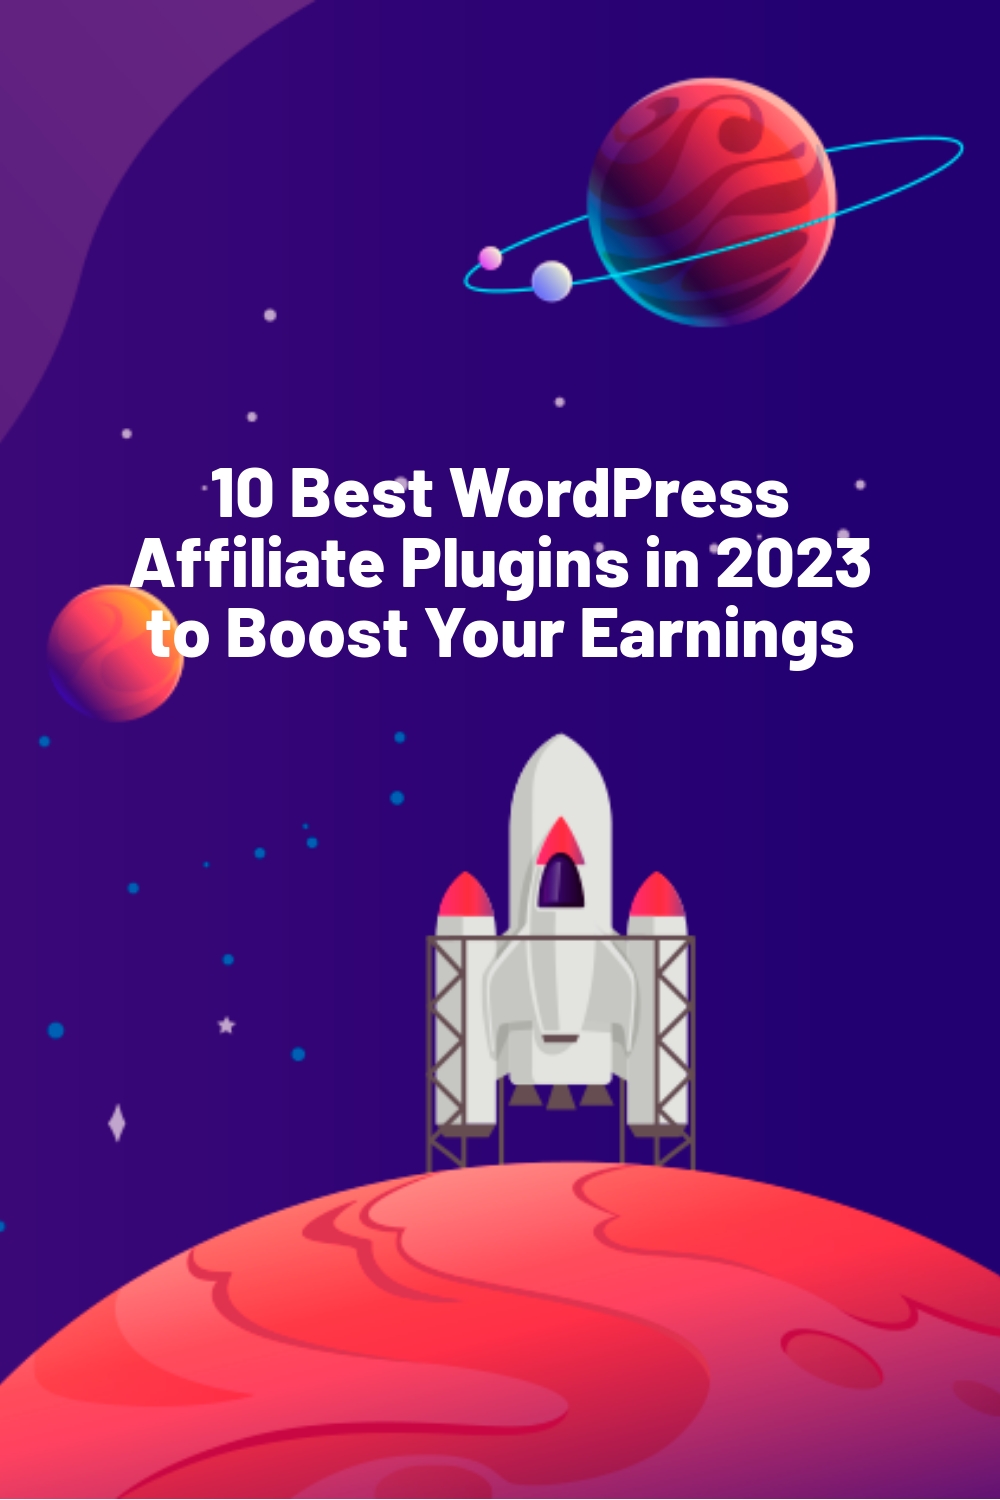 10 Best WordPress Affiliate Plugins in 2023 to Boost Your Earnings